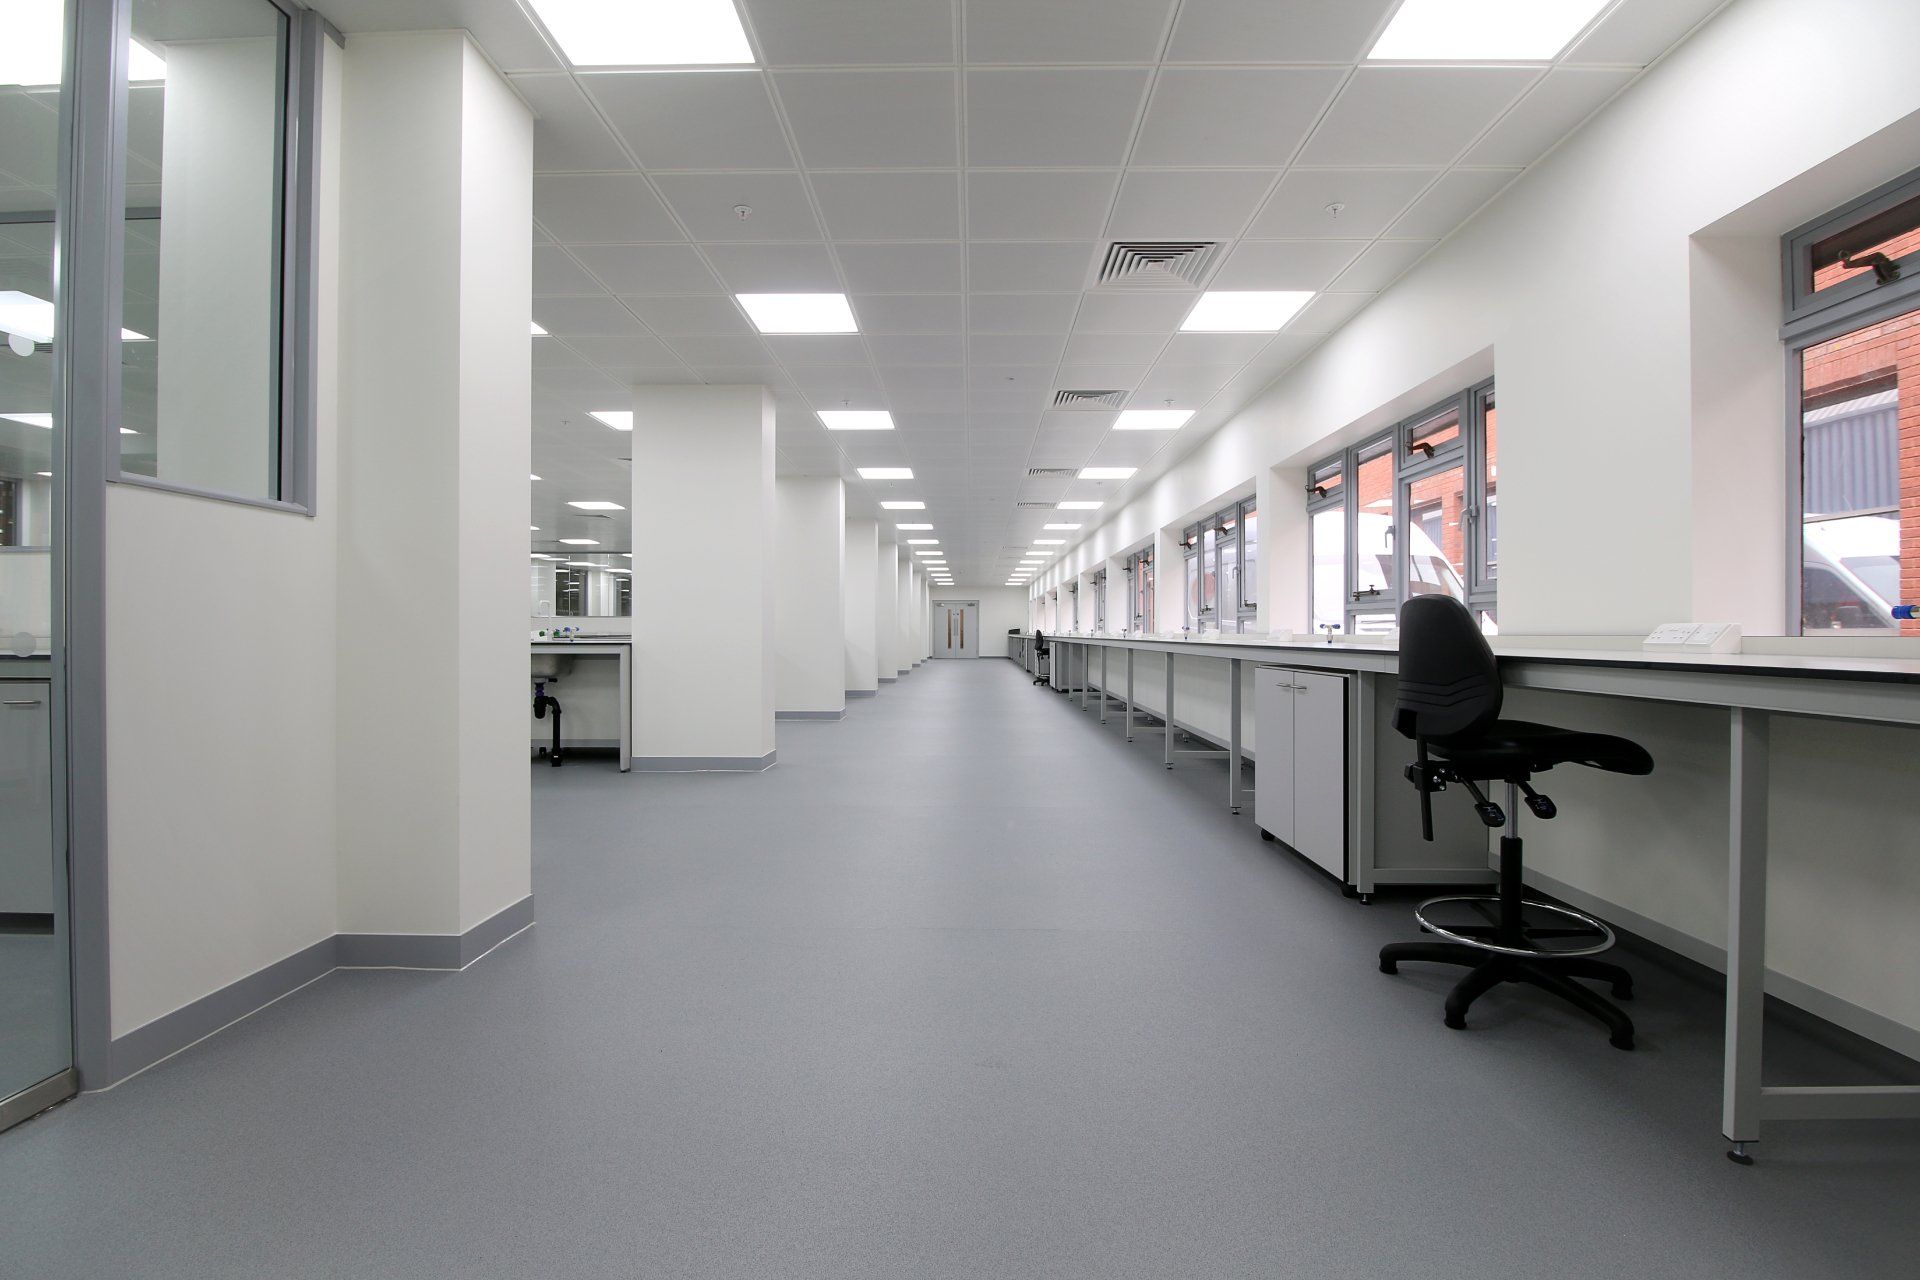 A long hallway in a building with desks and chairs.